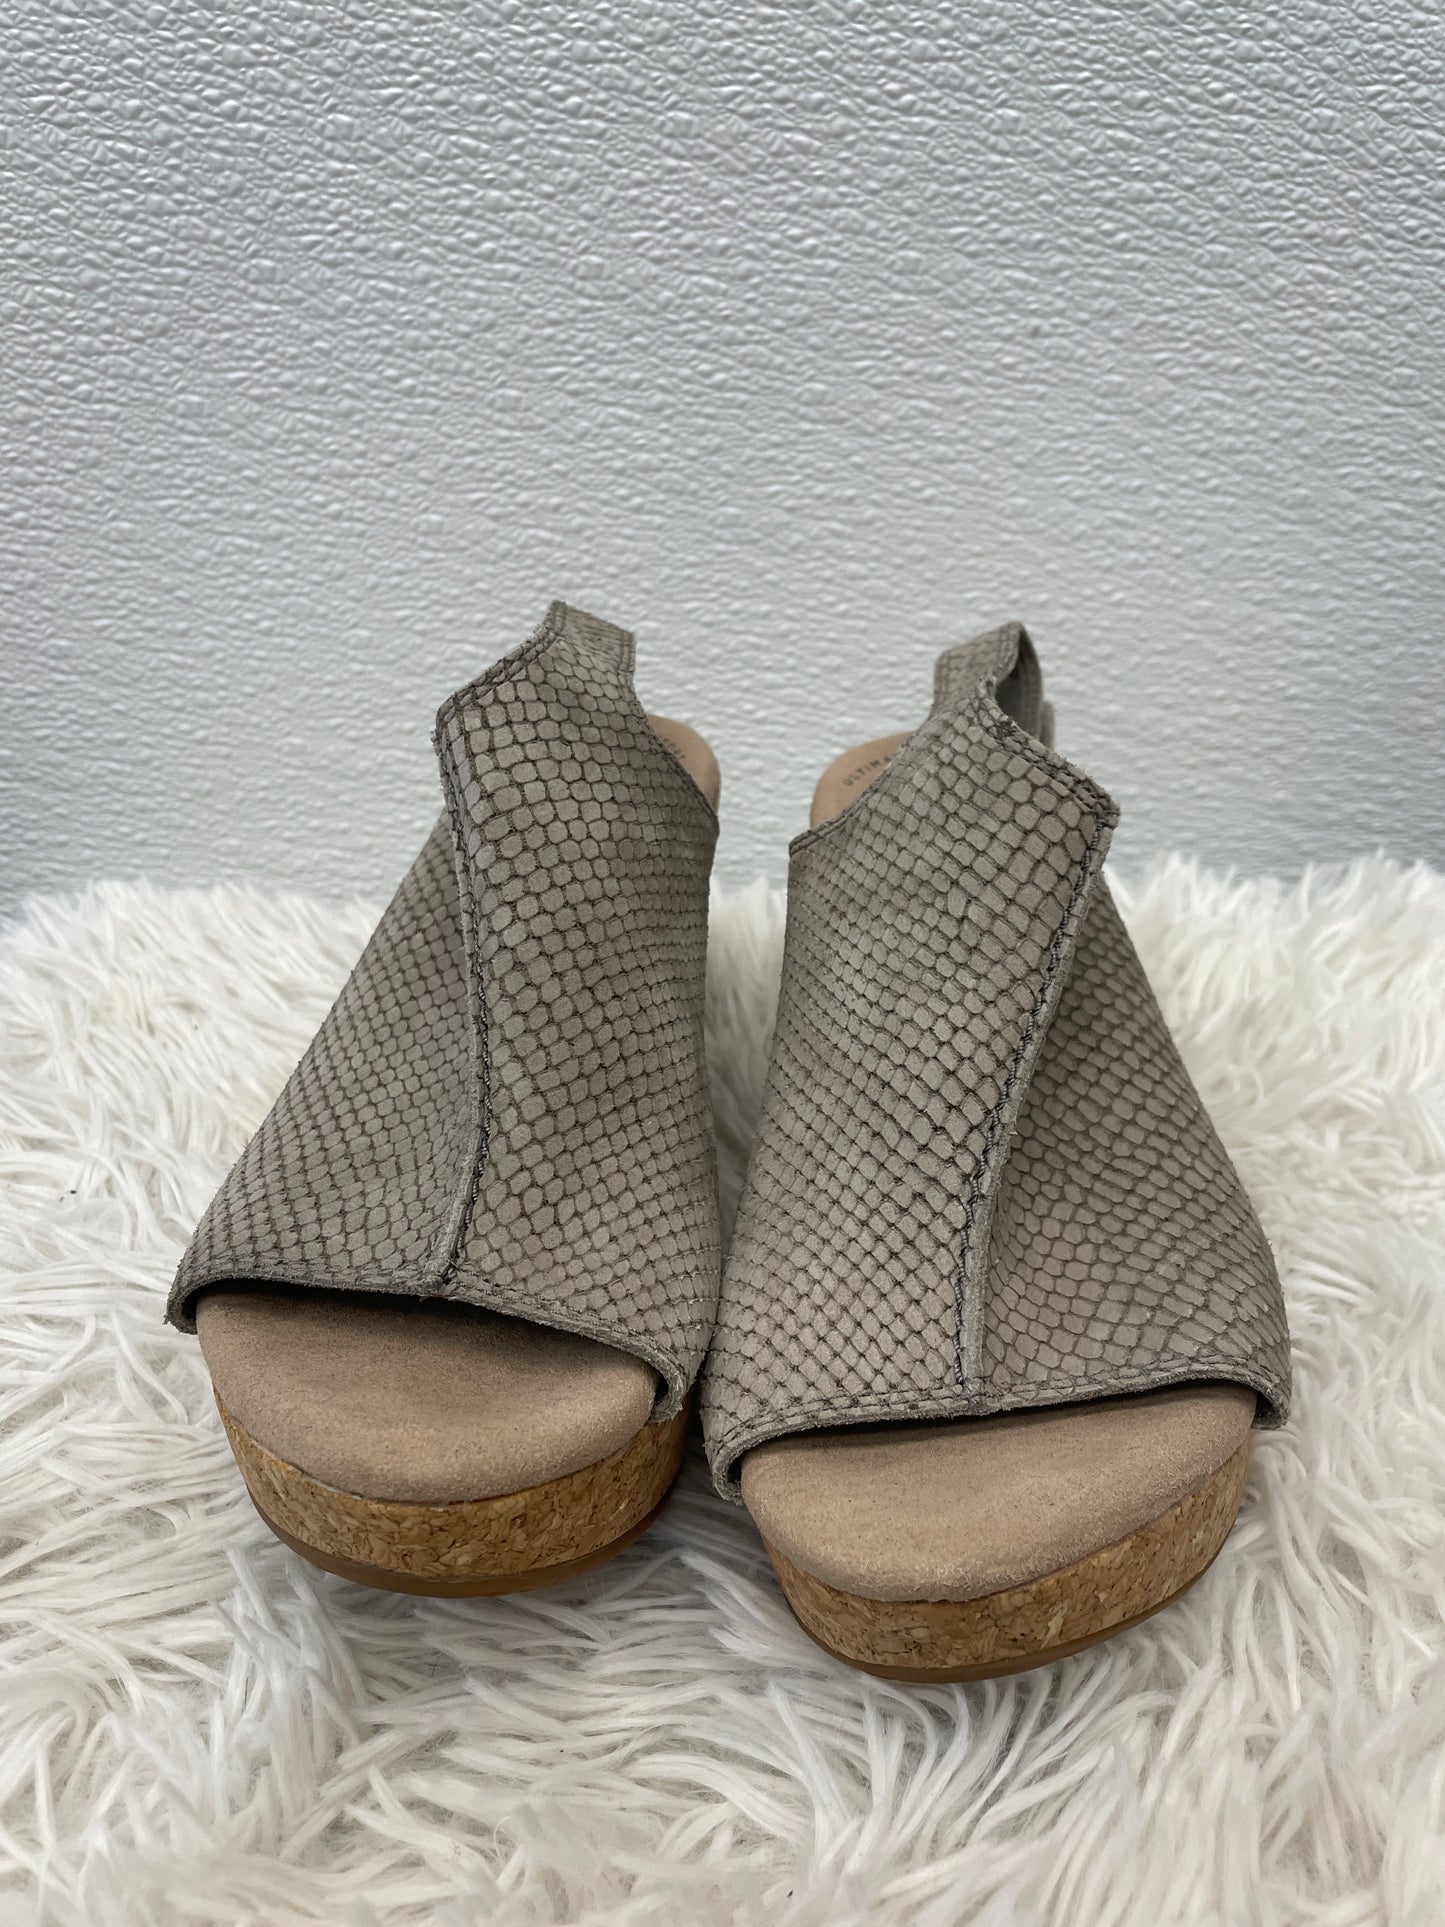 Sandals Heels Wedge By Classic Collection  Size: 7